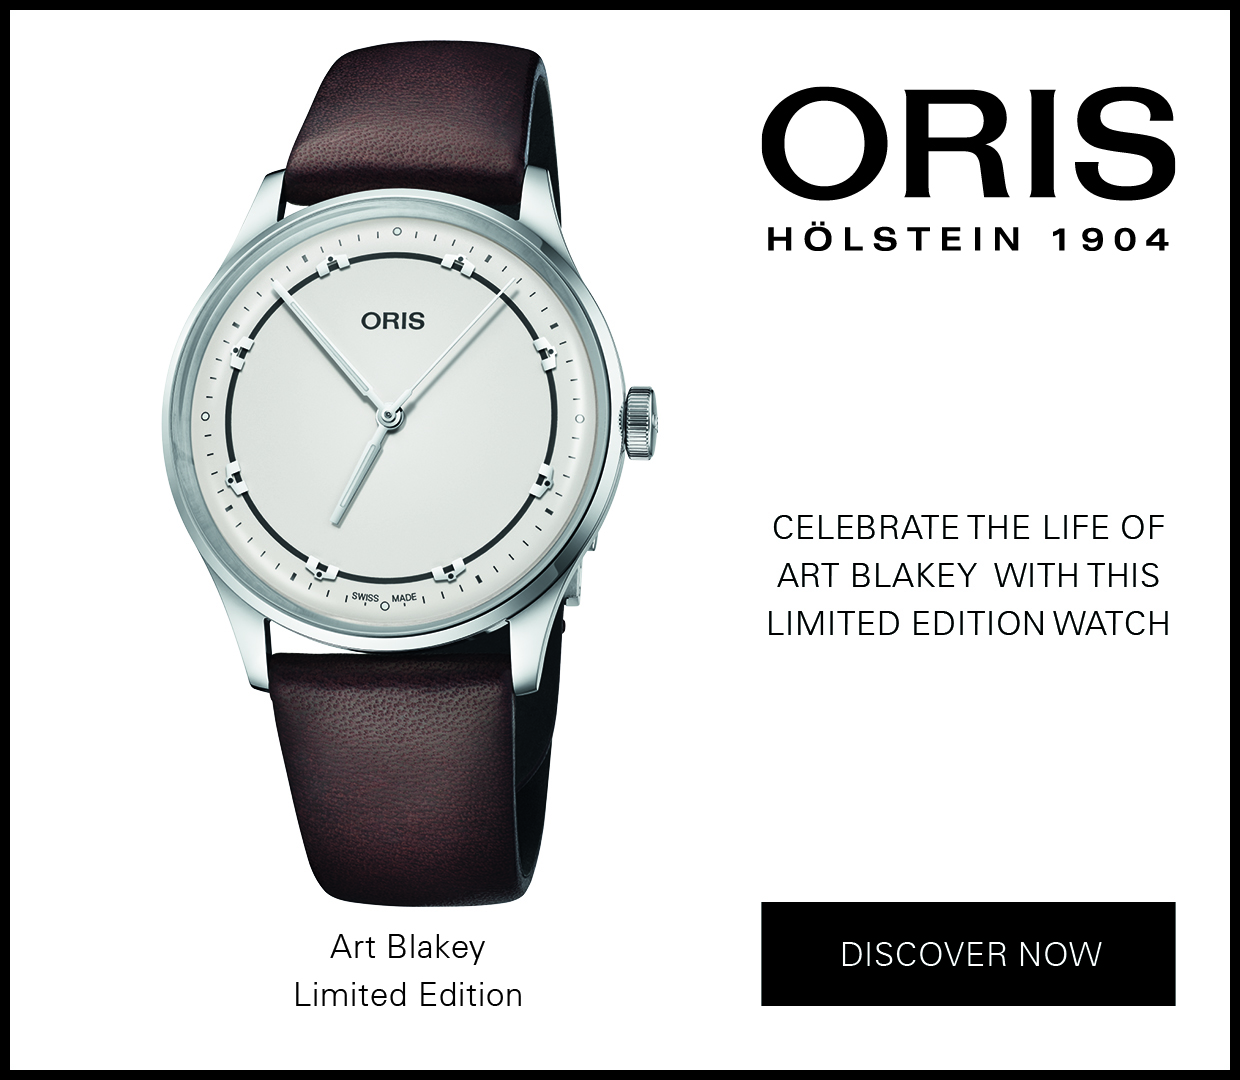 Celebrate the Life of Art Blakey with this Limited Edition Watch. Discover now at Oris!